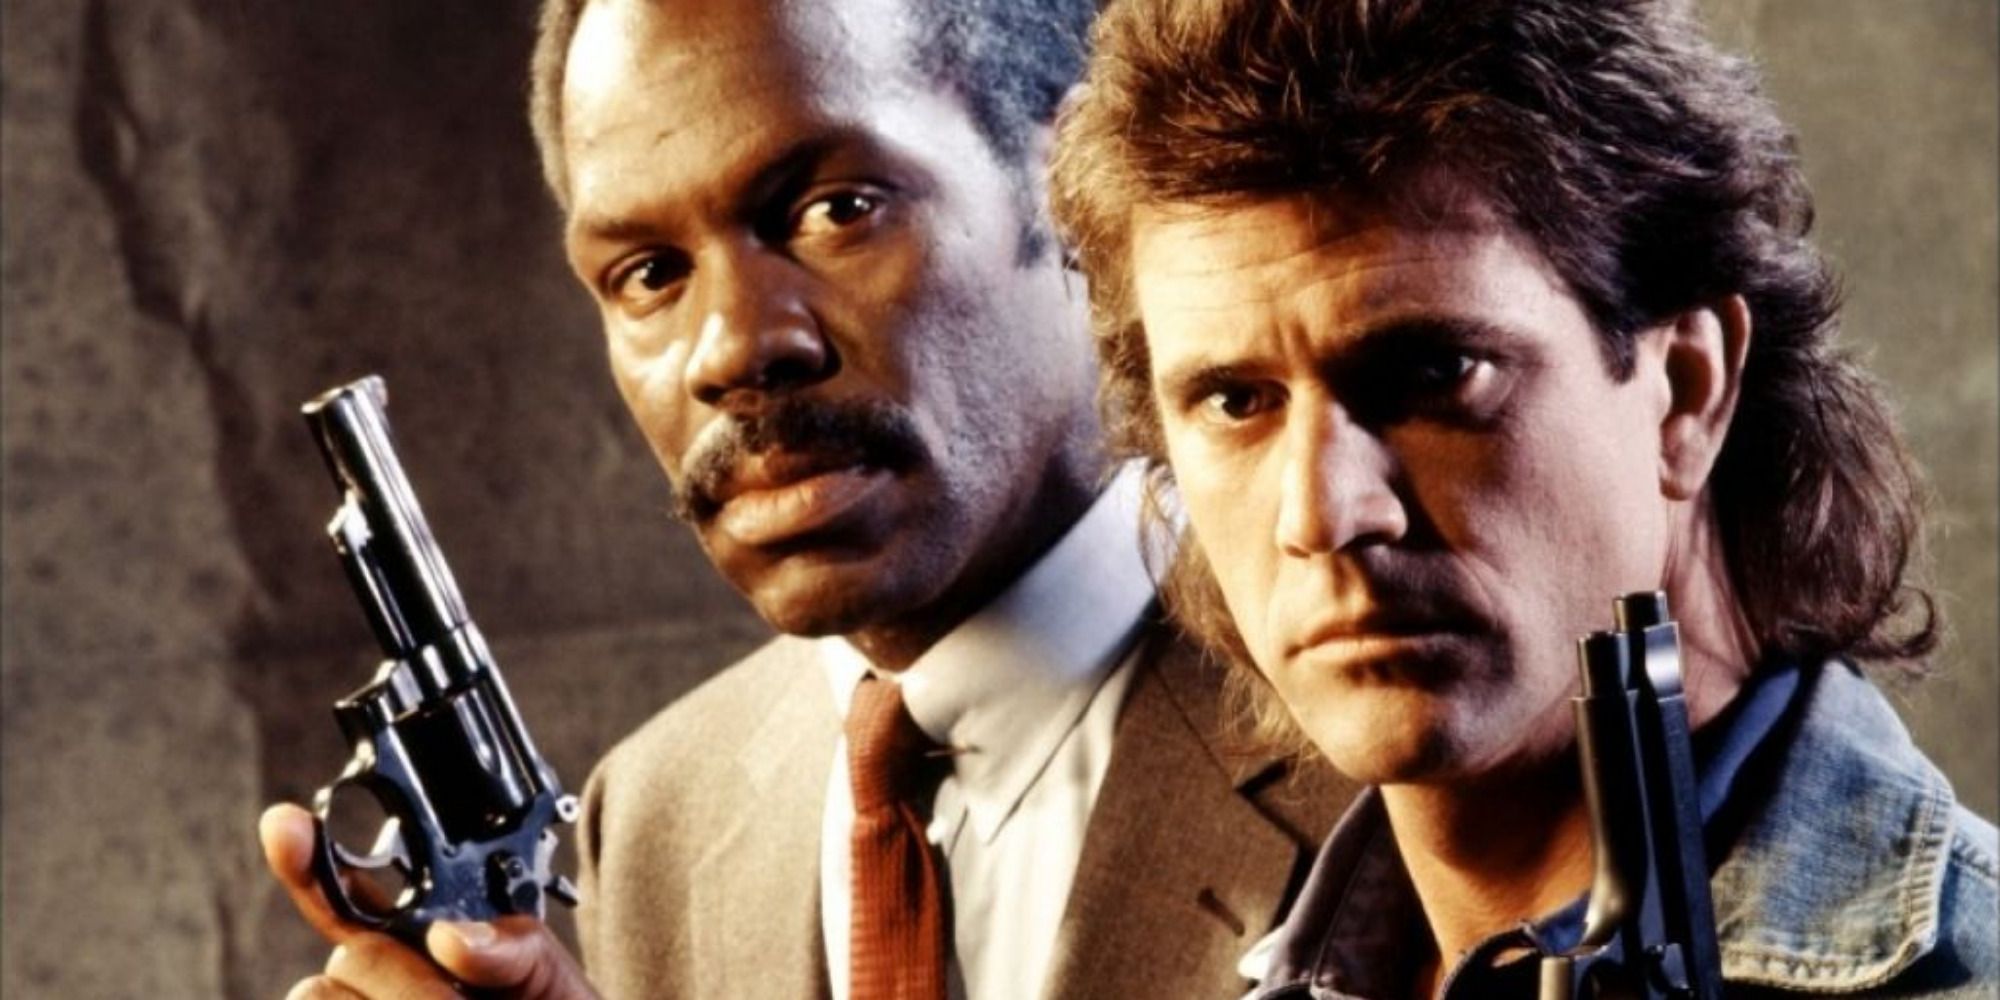 Riggs and Murtaugh from Lethal Weapon, holding guns